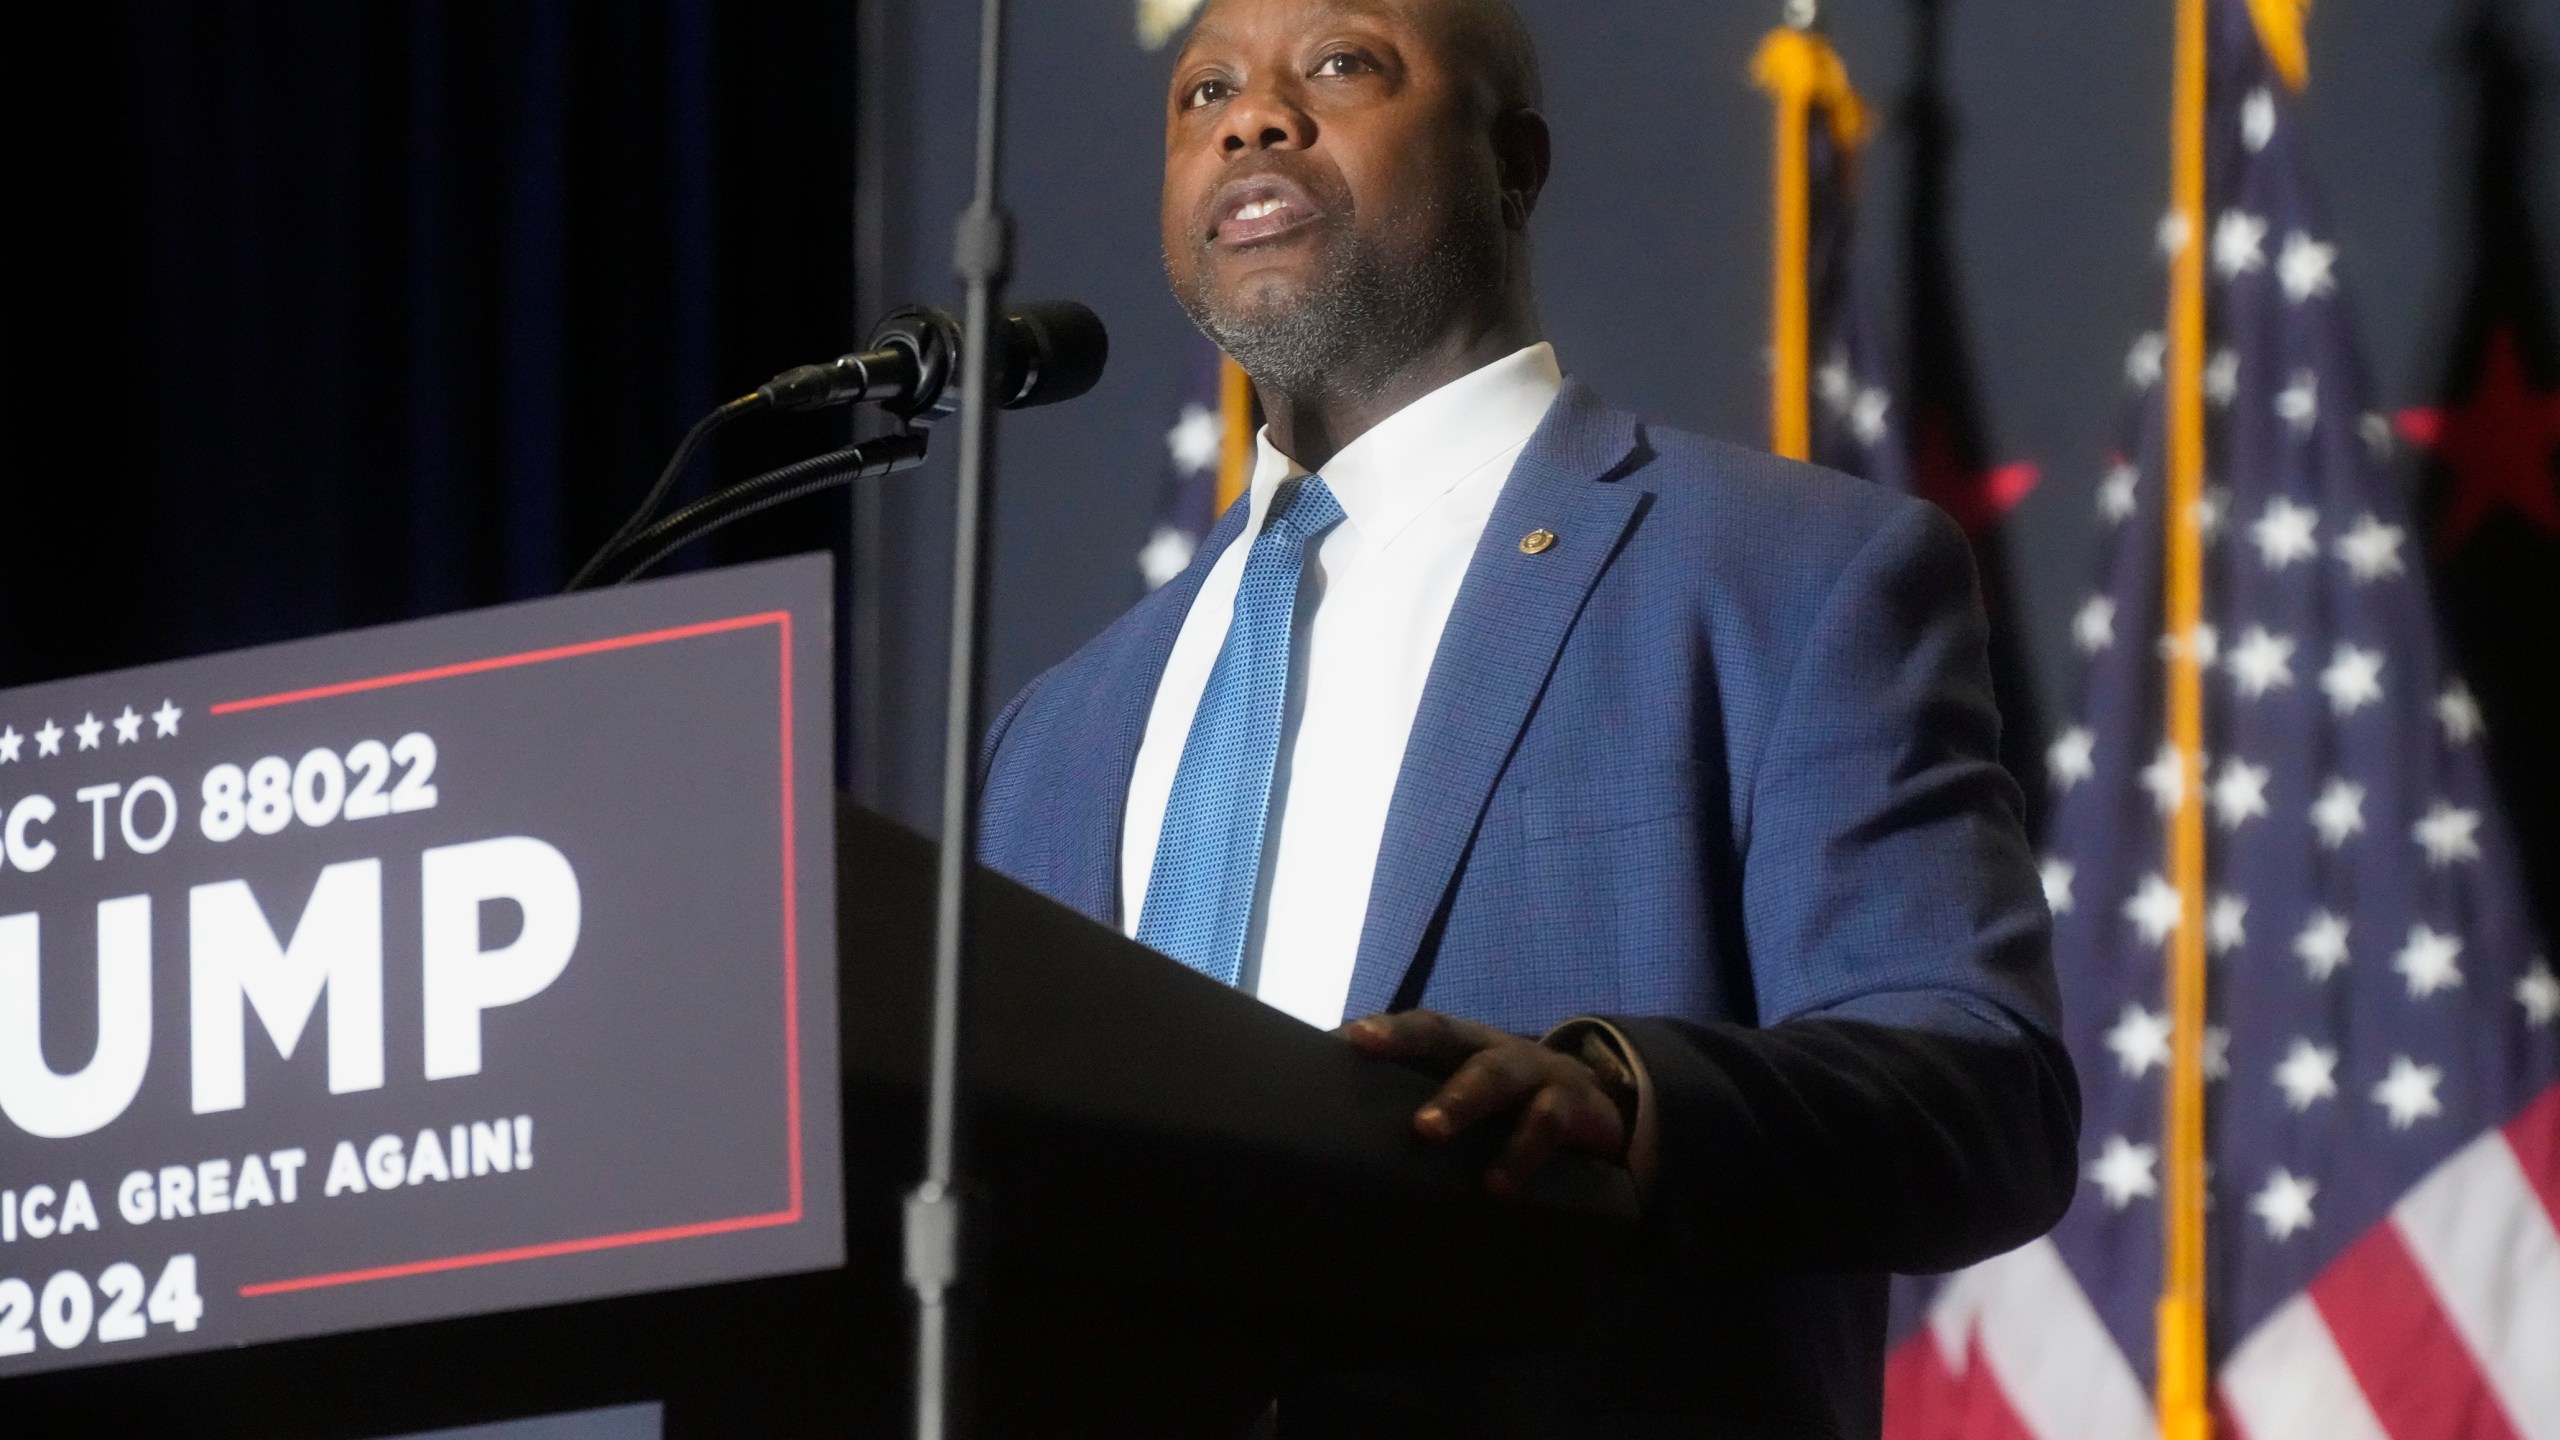 FILE - Sen. Tim Scott, R-S.C., speaks at a campaign rally, Feb. 14, 2024, in North Charleston, S.C. In some cases, Donald Trump's potential vice presidential contenders have had to abandon long-held policy positions and recant vehement criticism. In 2016, Scott excoriated Trump for his reluctance to condemn the Ku Klux Klan, his attacks on a judge's Mexican heritage, and comments equivocating about the 2017 white nationalist rally in Charlottesville, Virginia. (AP Photo/Meg Kinnard, File)